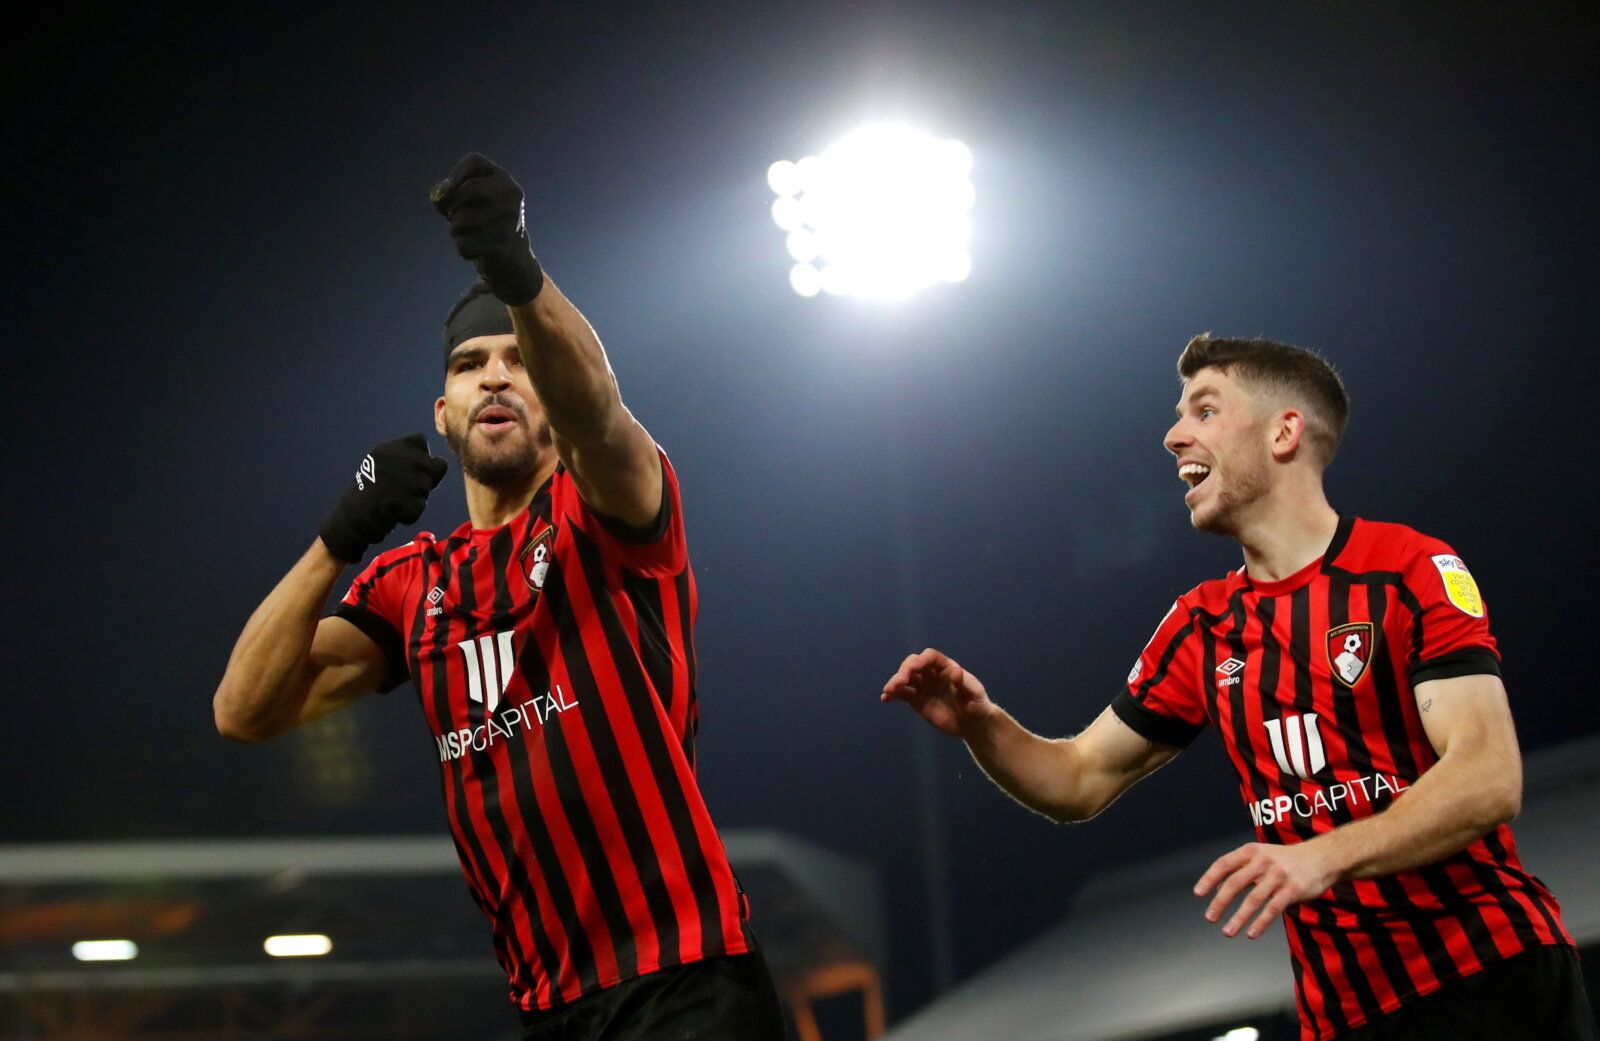 Soccer Football - Championship - Fulham v AFC Bournemouth - Craven Cottage, London, Britain - December 3, 2021 Bournemouth's Dominic Solanke celebrates after scoring their first goal Action Images/Andrew Boyers  EDITORIAL USE ONLY. No use with unauthorized audio, video, data, fixture lists, club/league logos or 